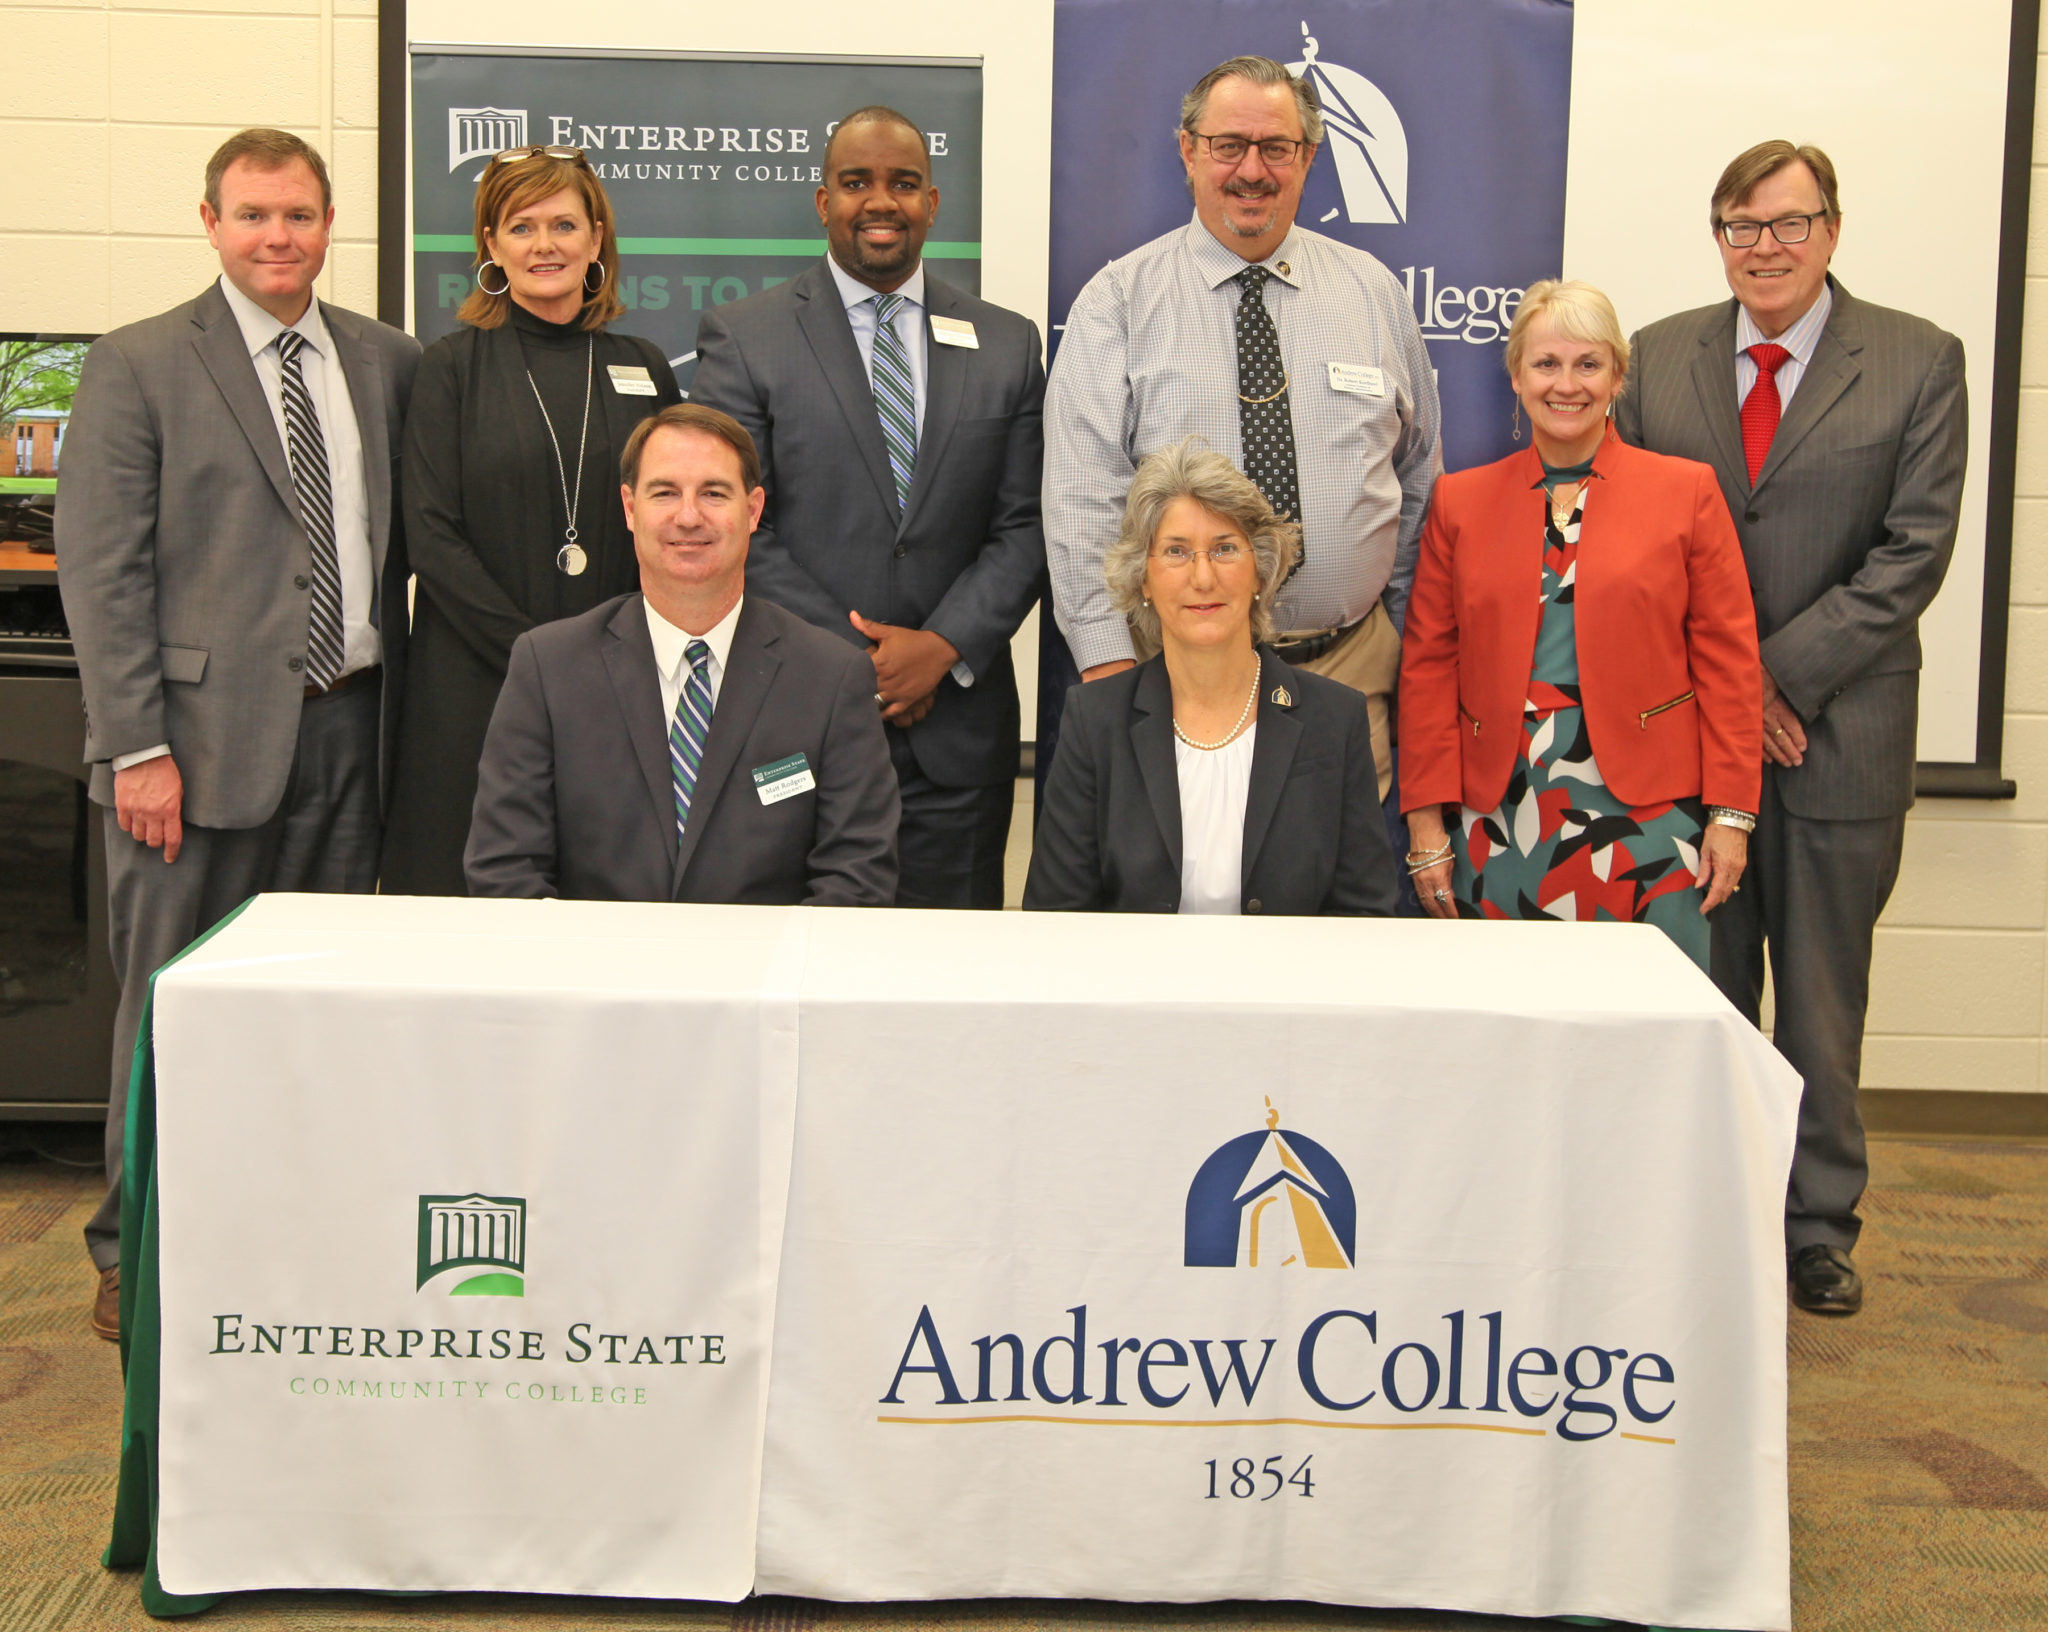 Enterprise State Community College and Andrew College sign articulation agreement